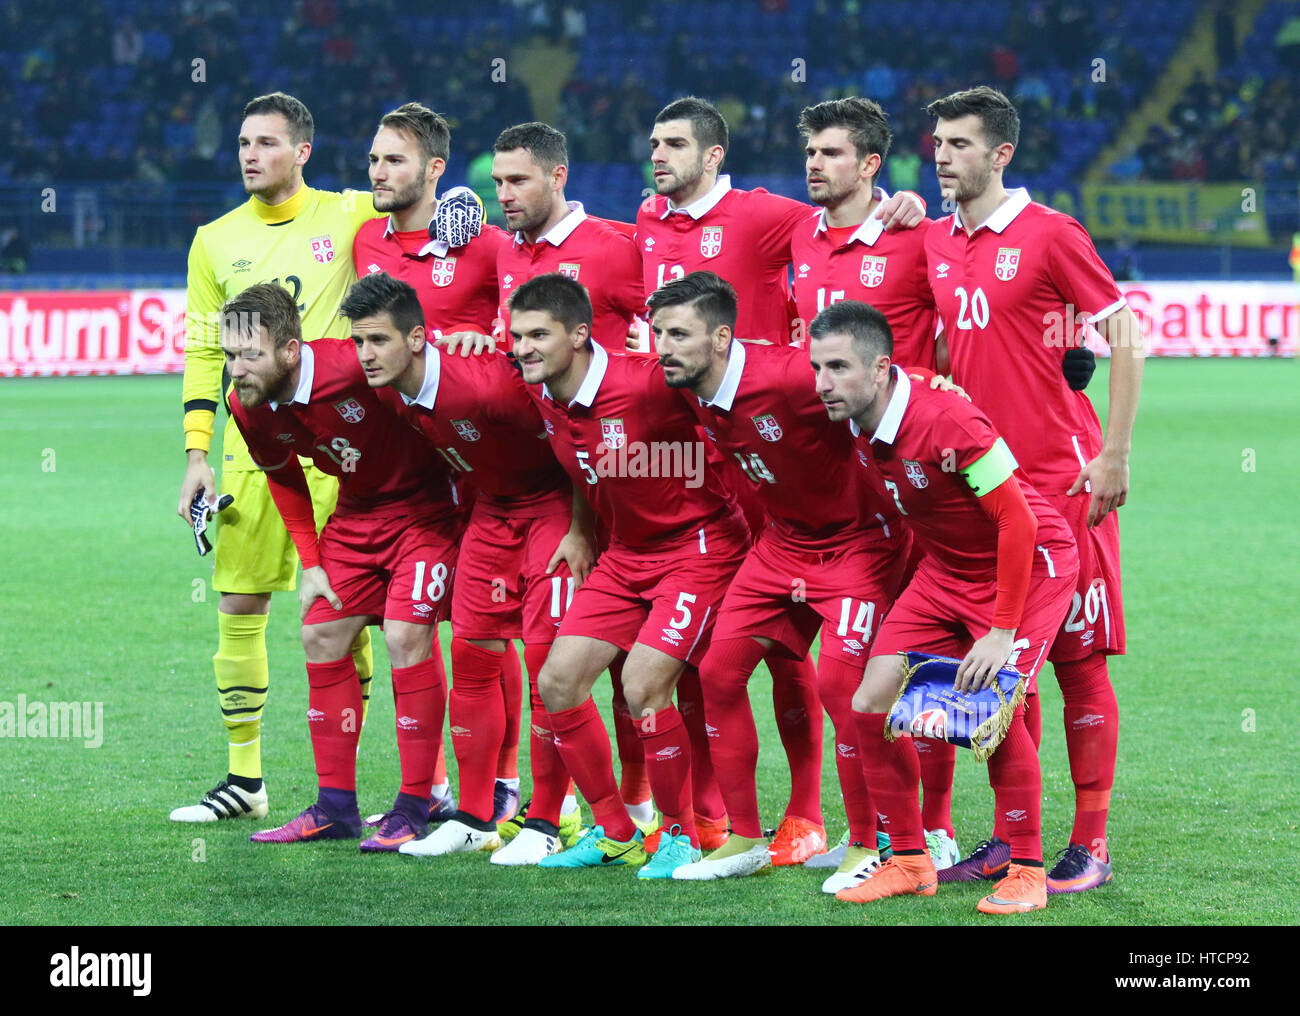 Kharkiv, Ukraine - November 15, 2016: Players of National football team of Serbia pose for a group photo before Friendly match against Ukraine at Meta Stock Photo